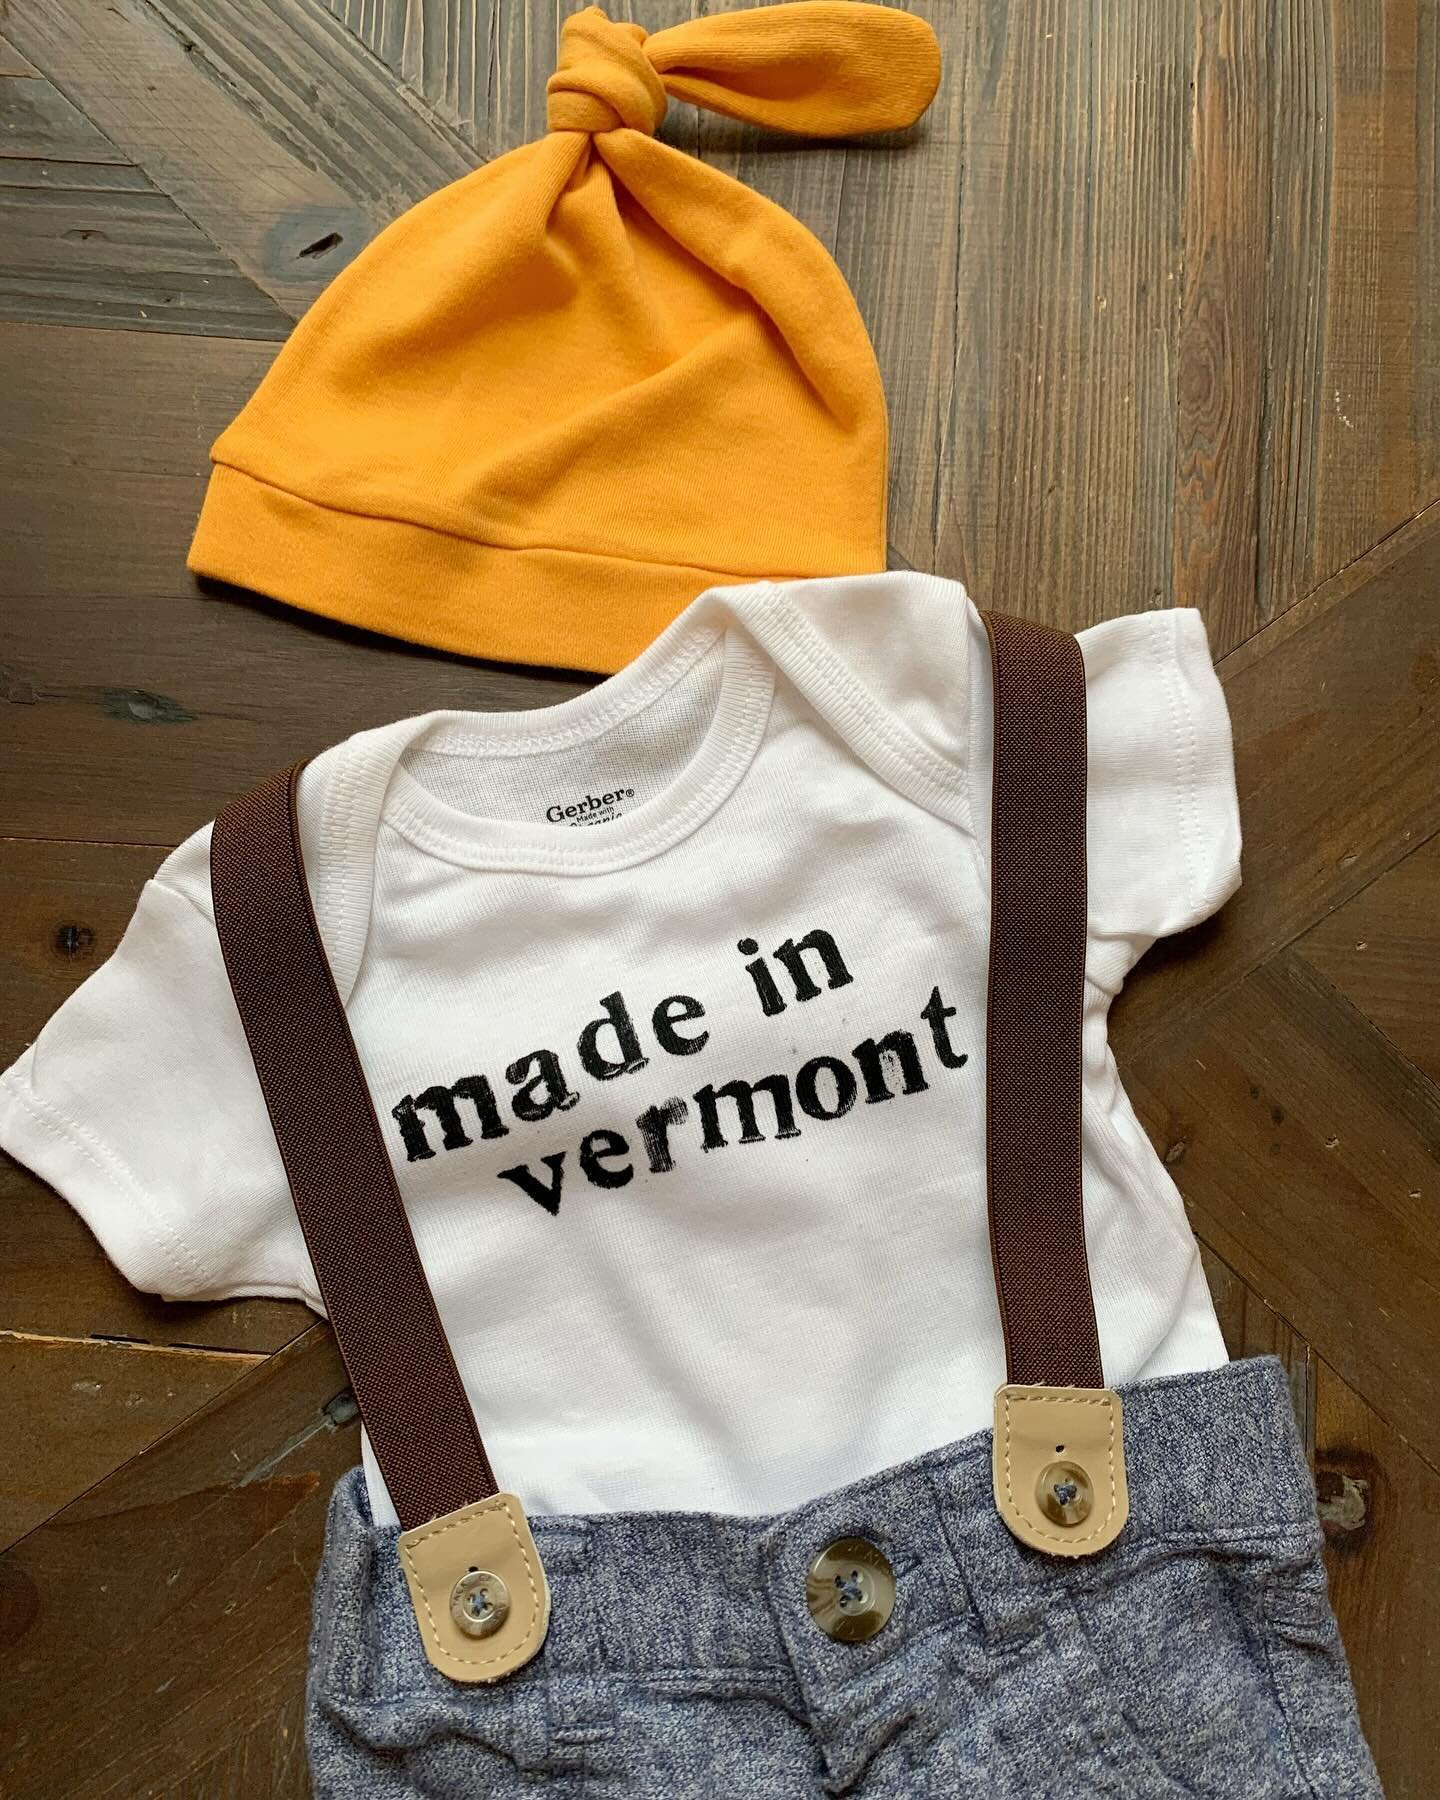 Welcome your little Vermonter to the world with this 100% organic cotton onesie set! 🌱🫶🏻 Freshly stamped and restocked in the online shop! #vermontprint #vermontartist #vermontbaby #madeinvt #madeinvermont